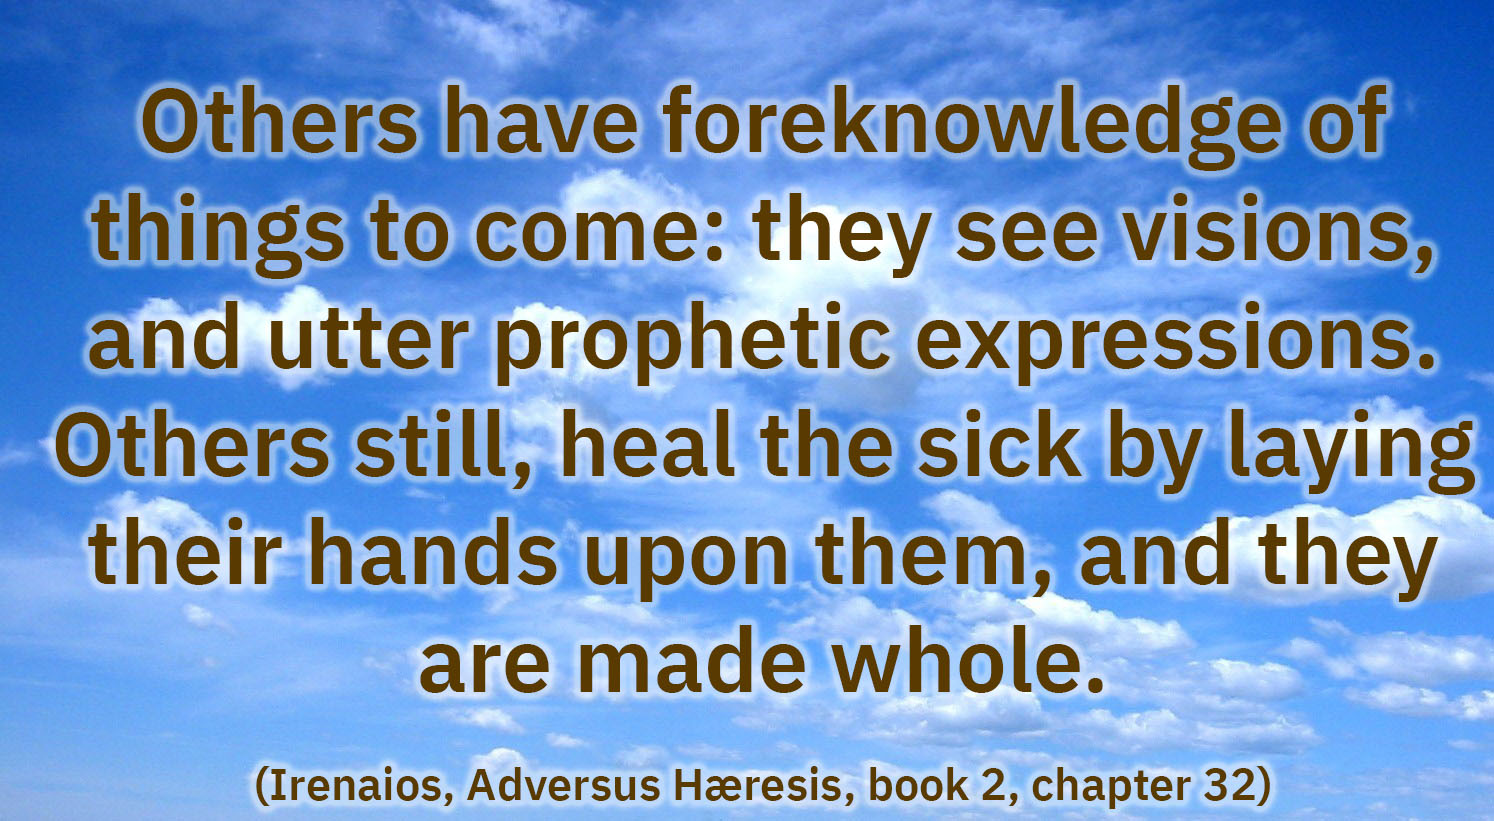 Citat av Irenaios: Others have foreknowledge of things to come: they see visions, and utter prophetic expressions. Others still, heal the sick by laying their hands upon them, and they are made whole.